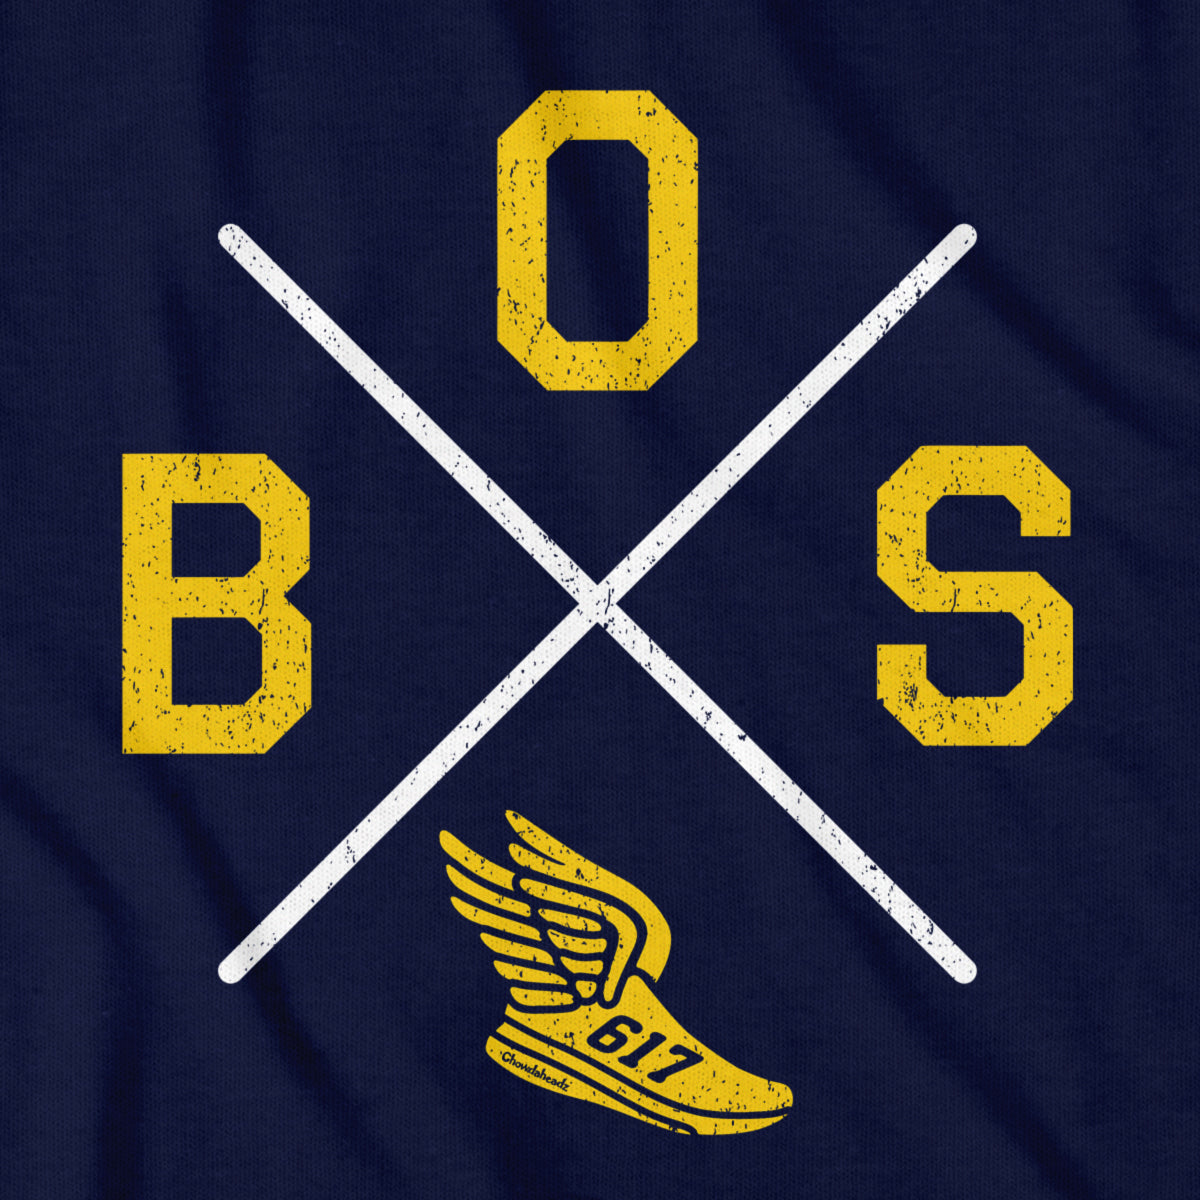 BOS Sneaker Crossed Out T-Shirt - Chowdaheadz